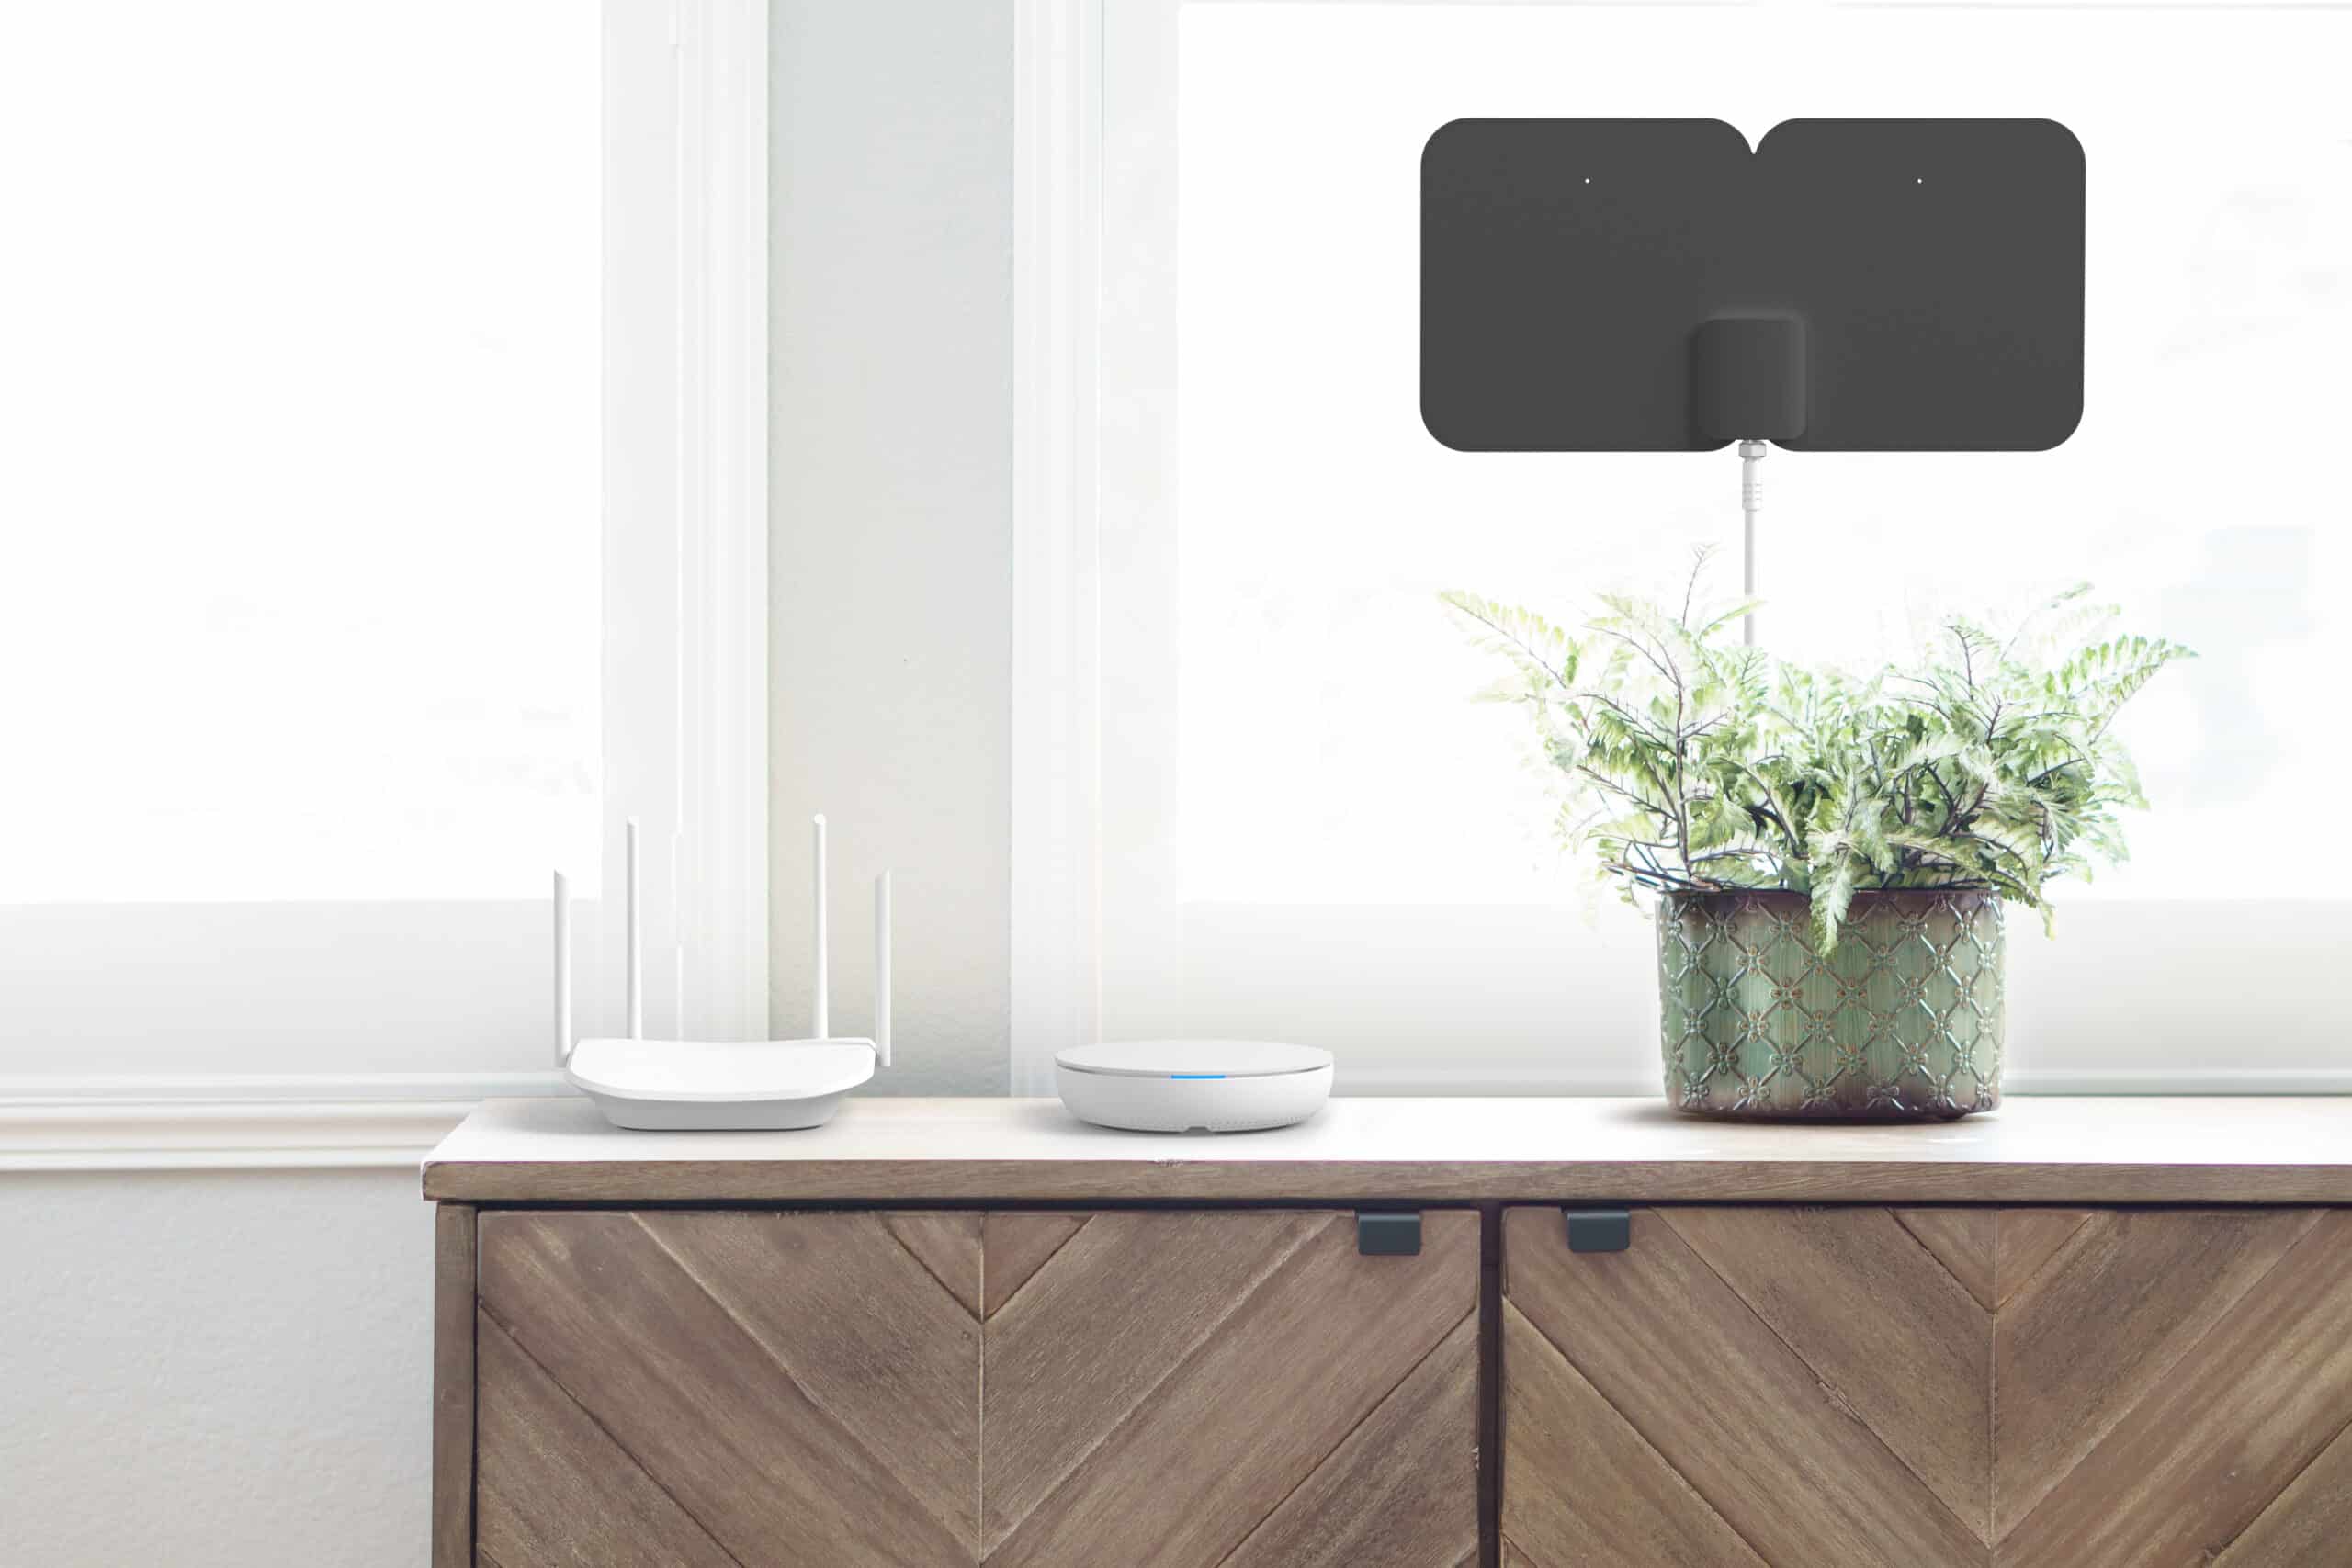 Tablo near router on wooden credenza with black antenna in window behind